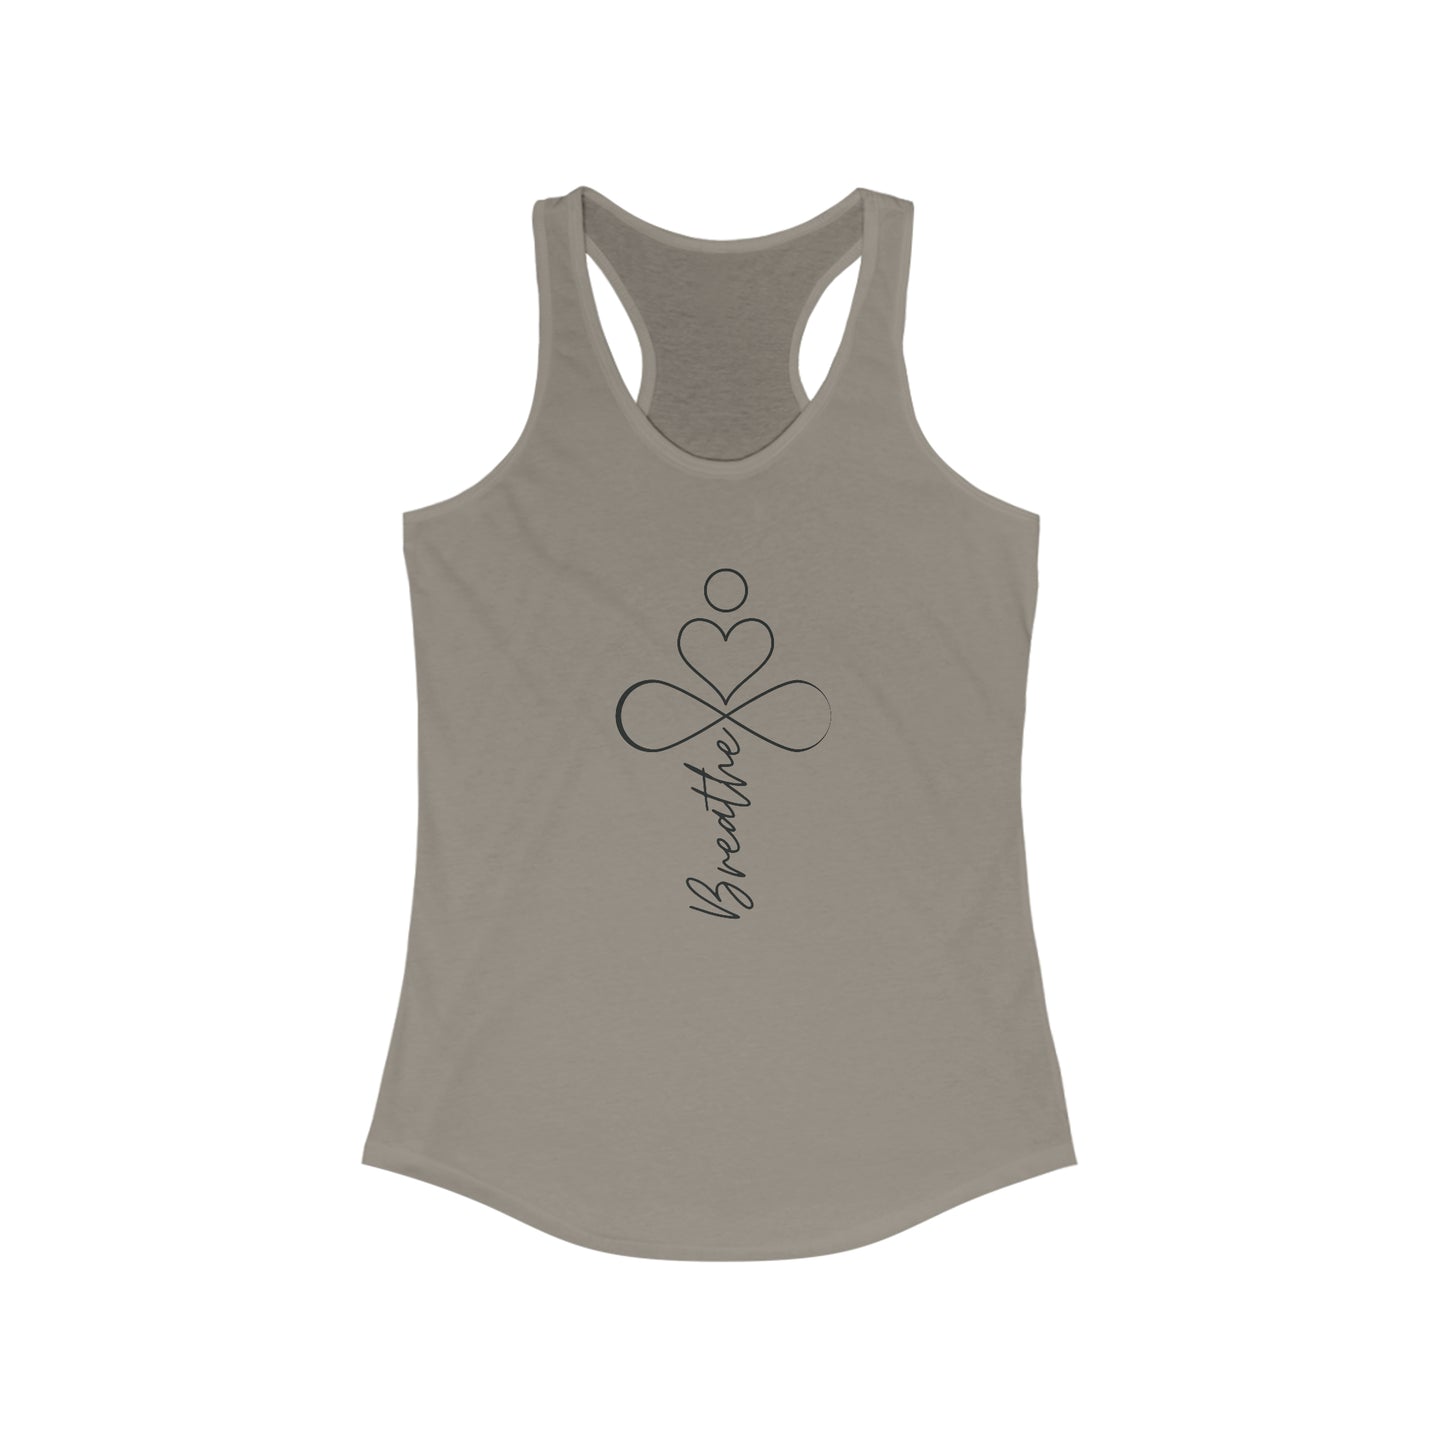 Breathe up - Yoga Inspired Tank Top